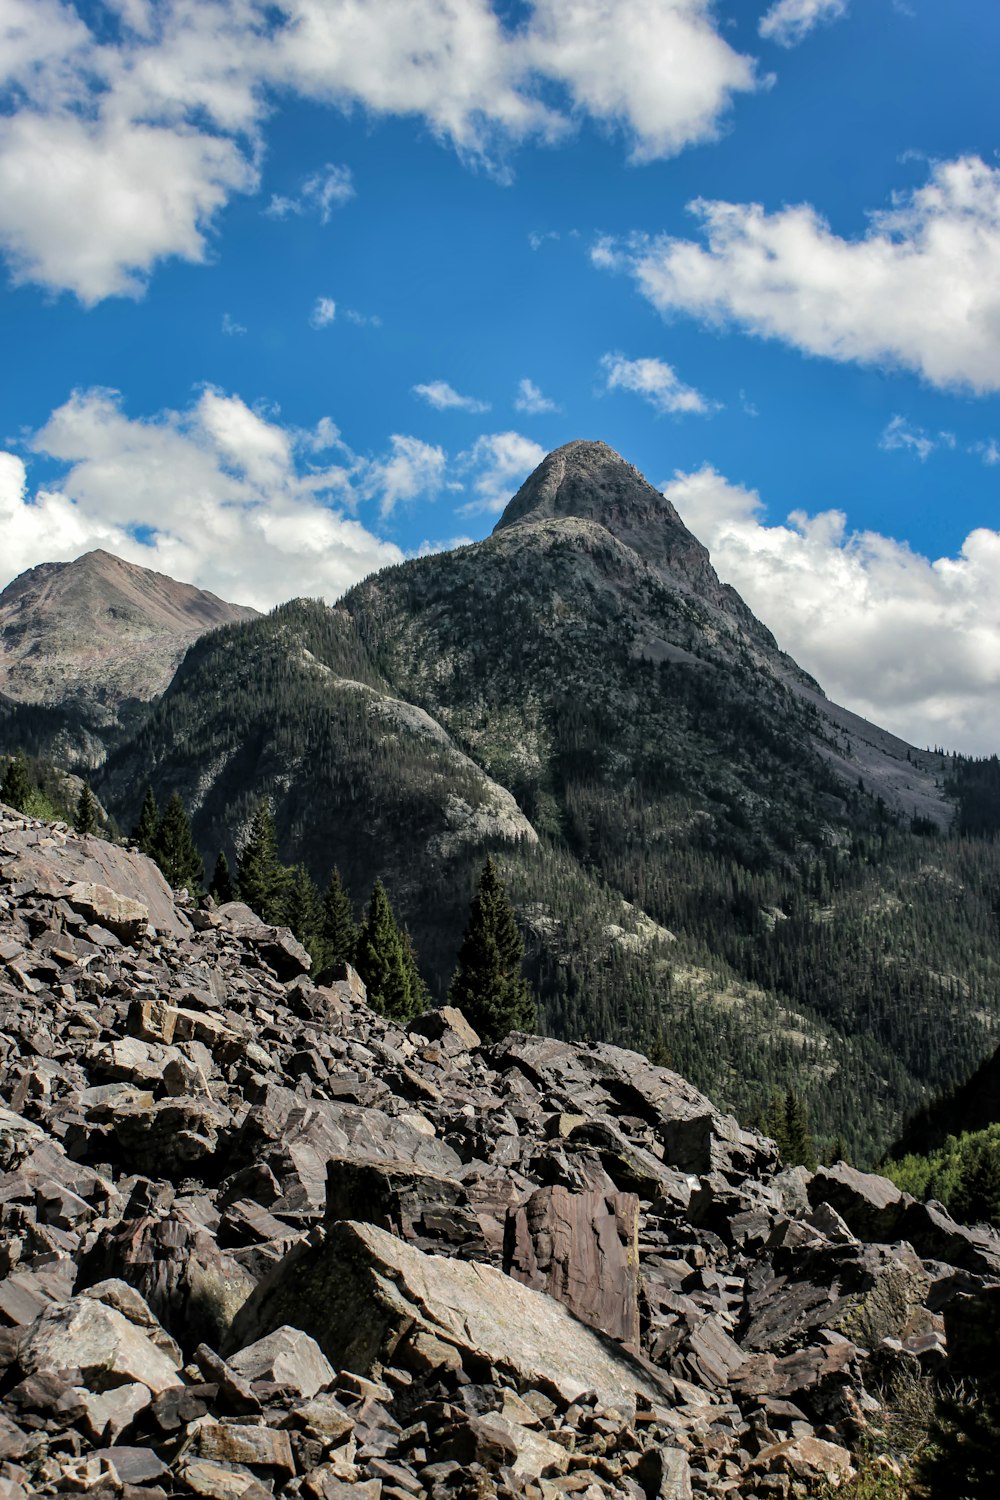 a view of a mountain range with rocks and trees